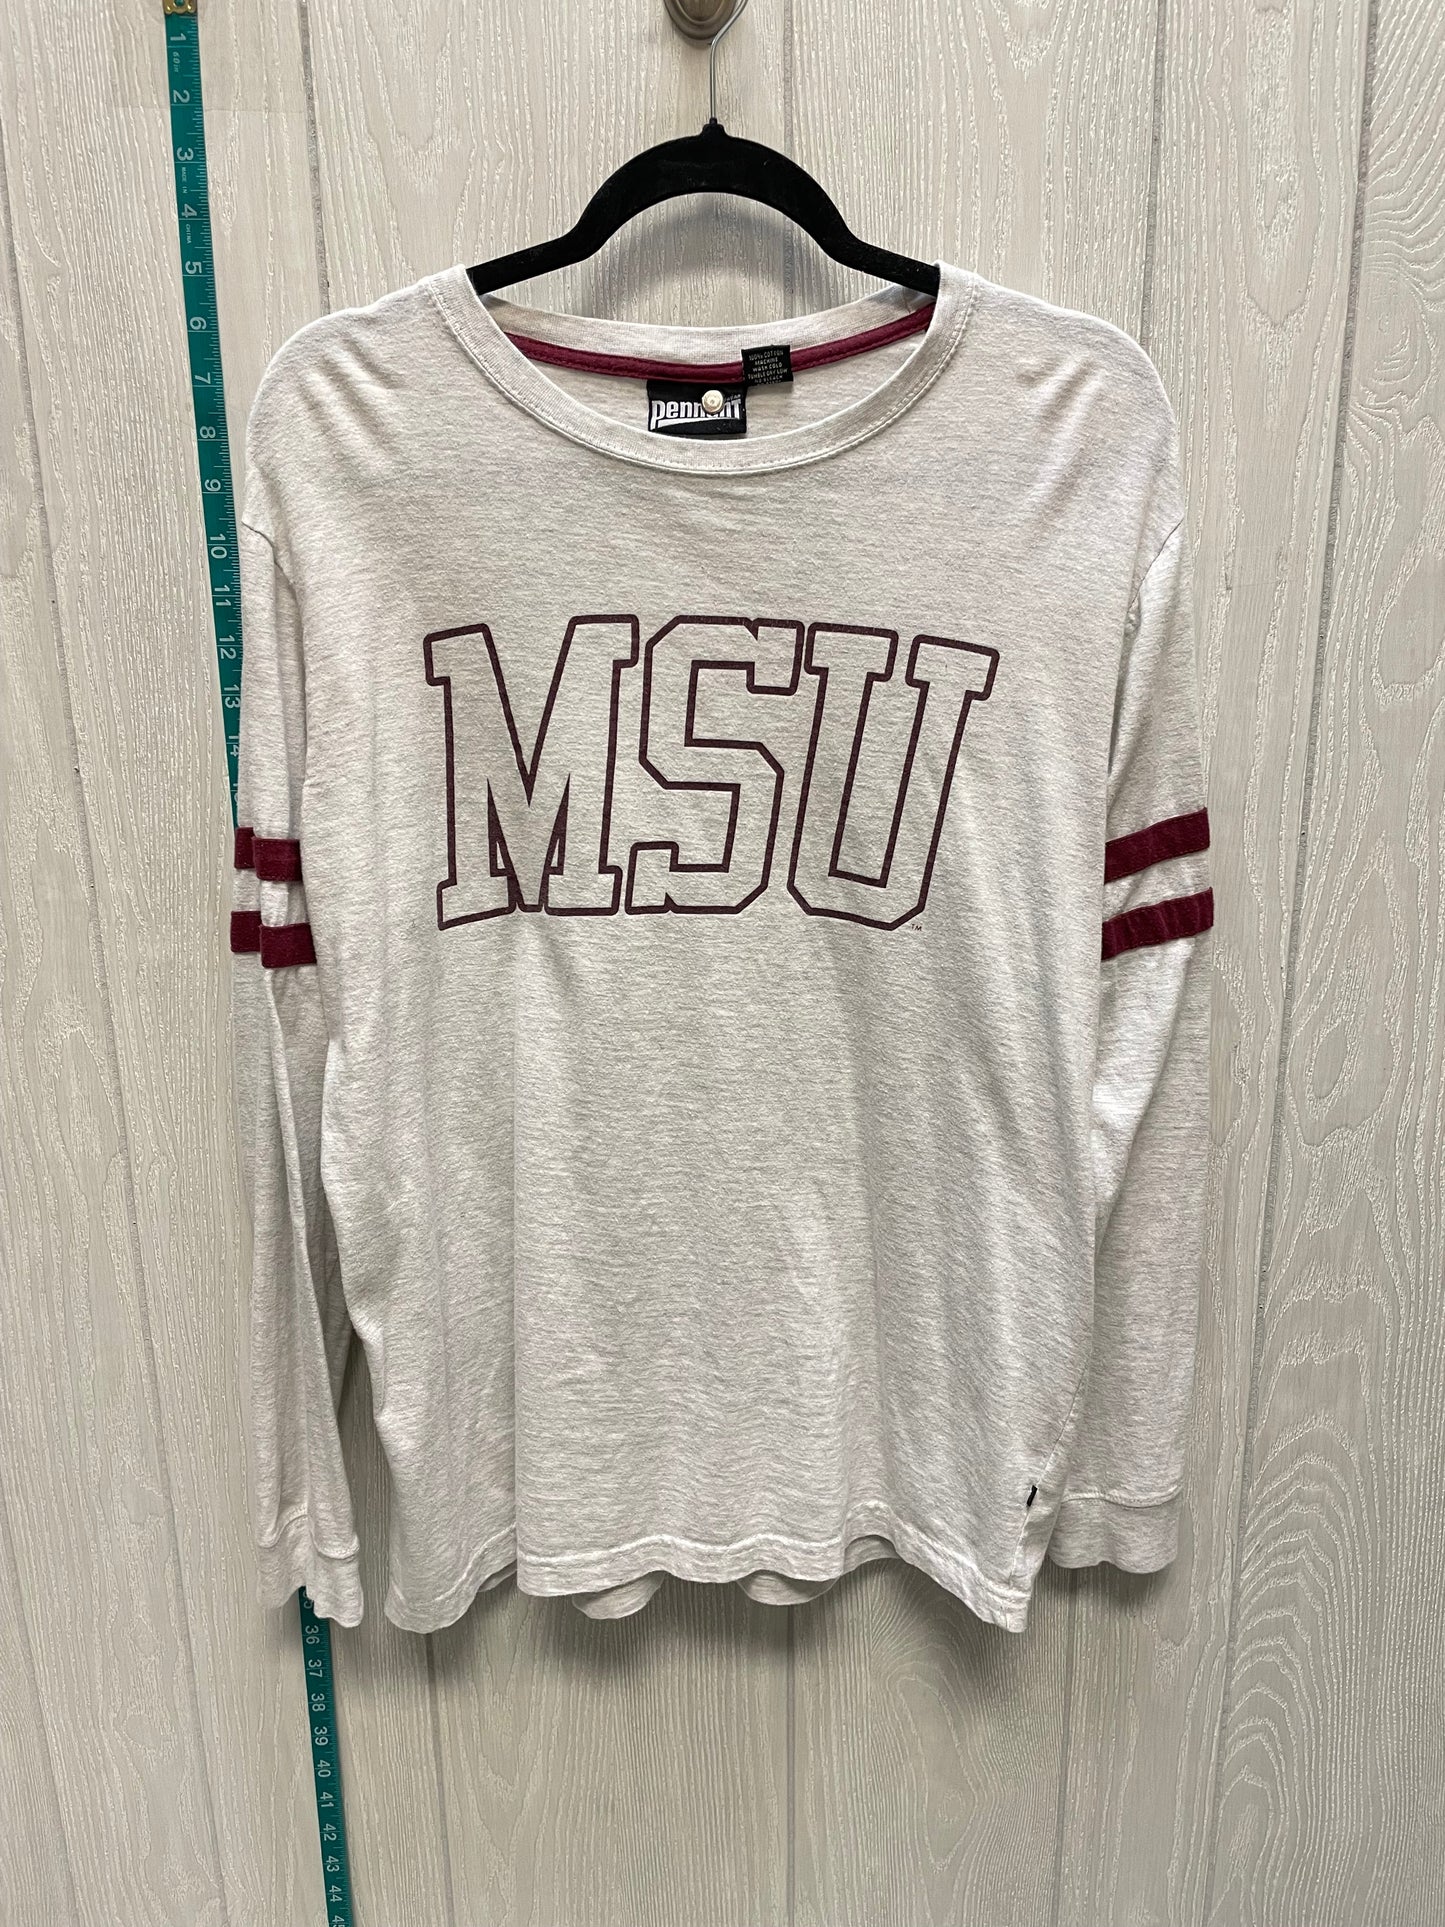 Oatmeal Top Long Sleeve Clothes Mentor, Size M